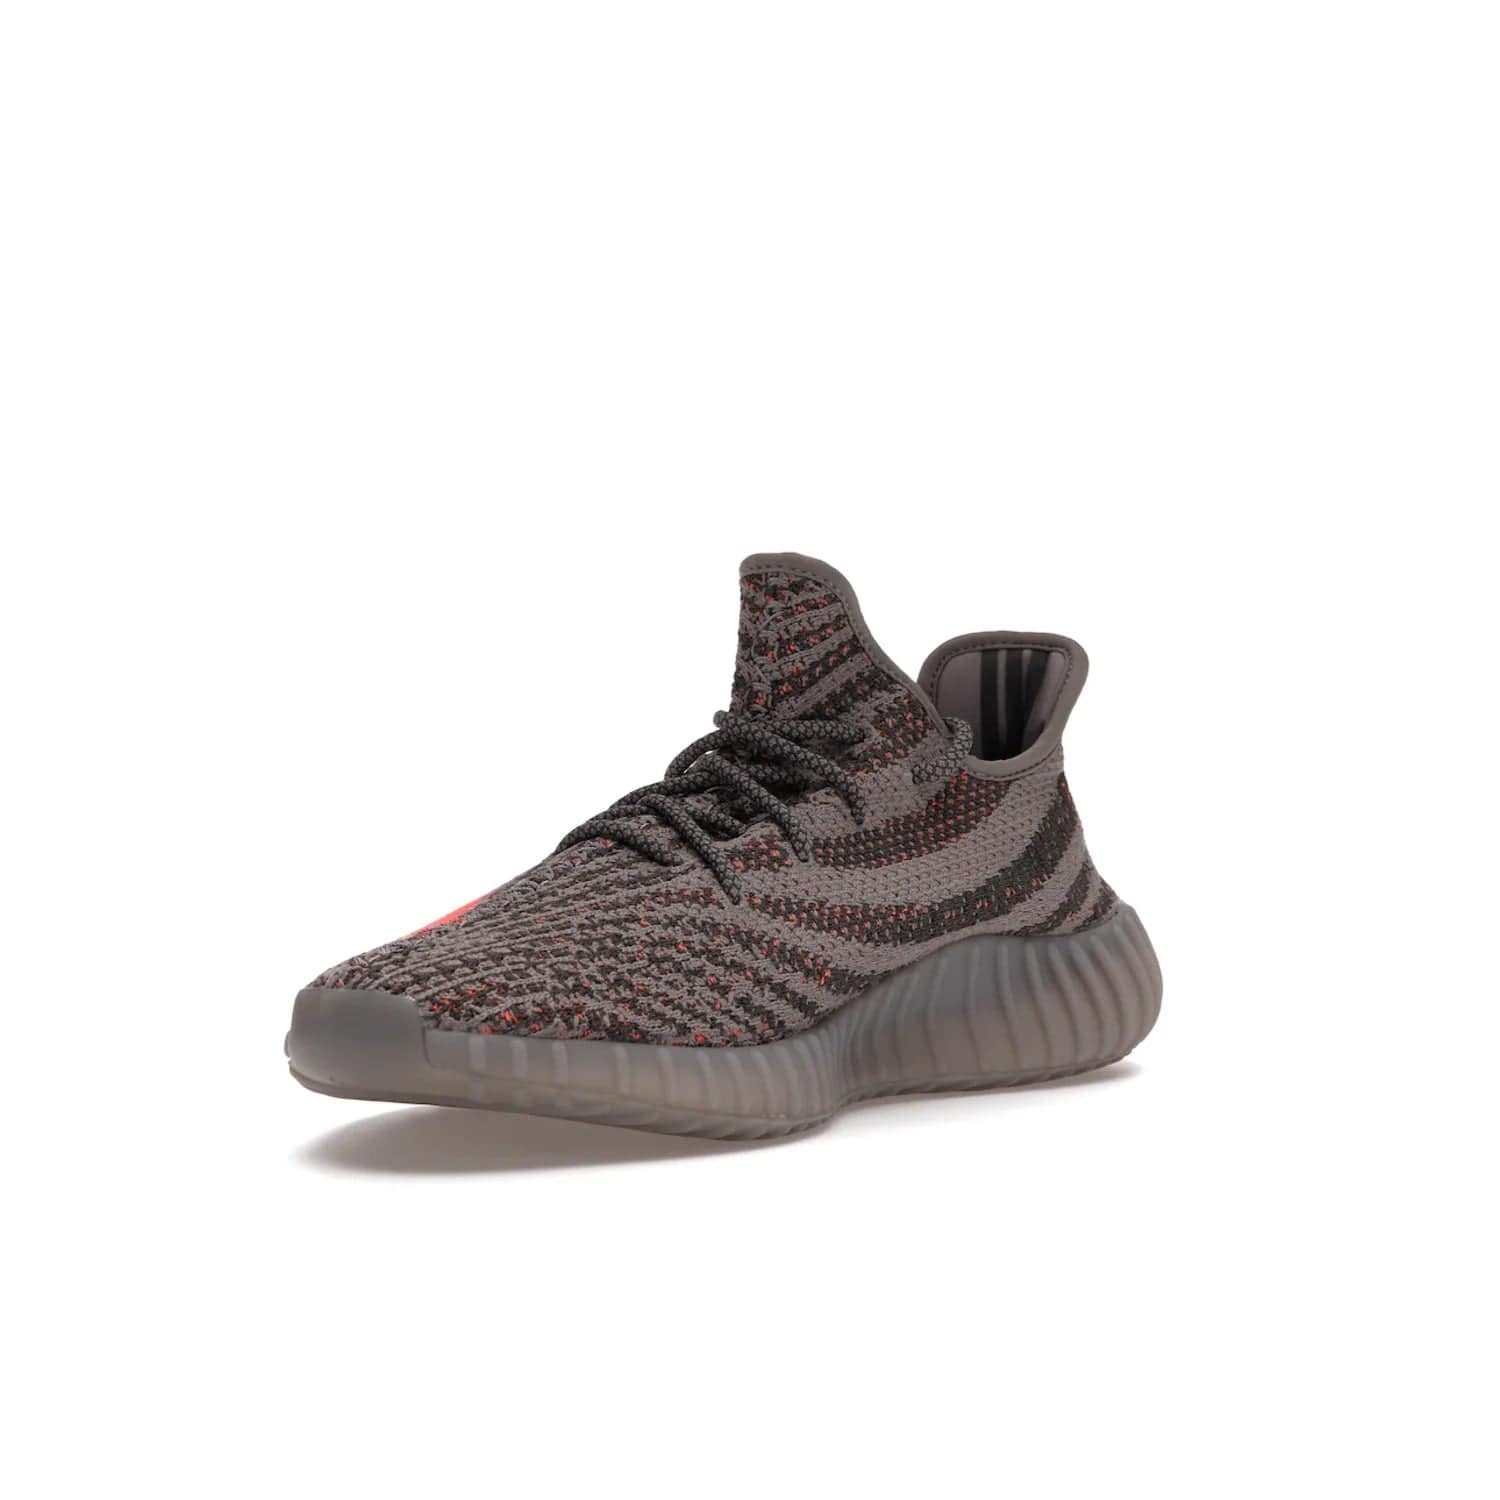 adidas Yeezy Boost 350 V2 Beluga Reflective - Image 14 - Only at www.BallersClubKickz.com - Shop the adidas Yeezy Boost 350 V2 Beluga Reflective: a stylish, reflective sneaker that stands out. Featuring Boost sole, Primeknit upper & signature orange stripe. Available Dec 2021.